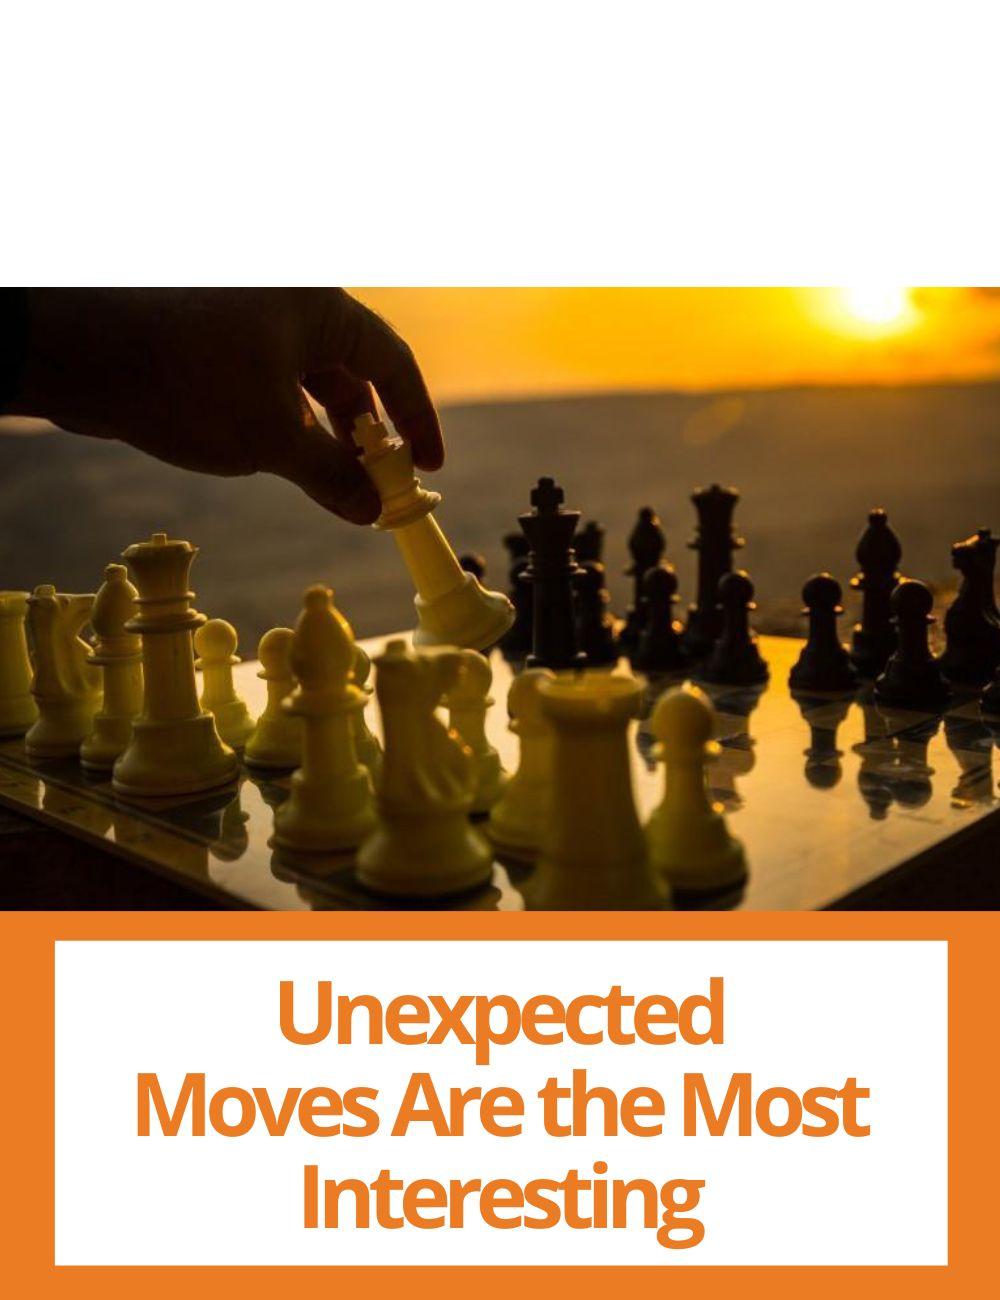 Link to related stories. Image: a chess. Story headline: Unexpected Moves Are the Most Interesting